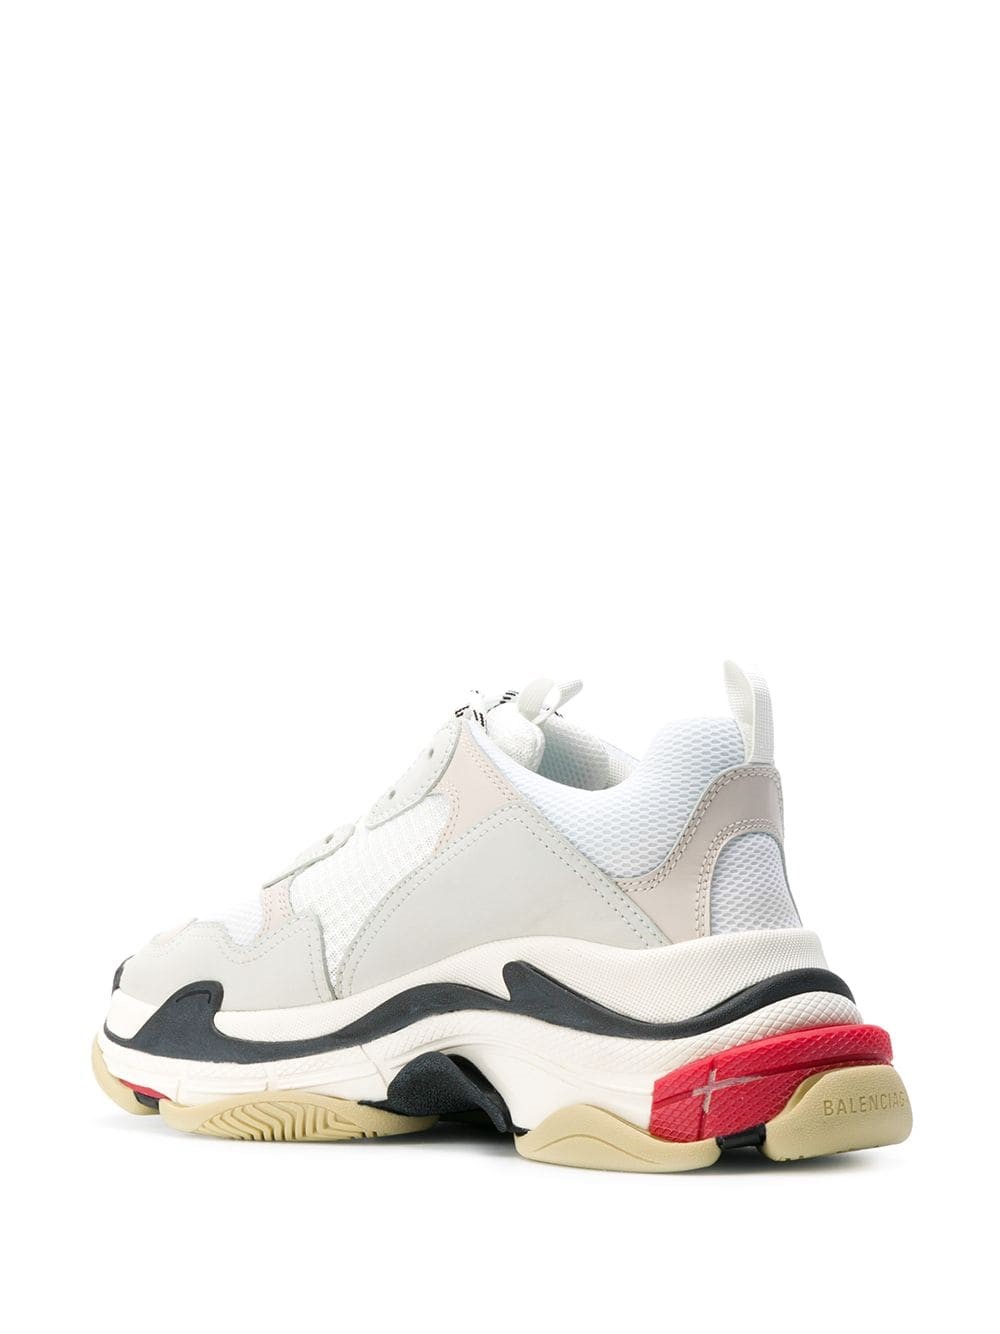 Balenciaga Triple S Black Suede Trainers Products in 2019